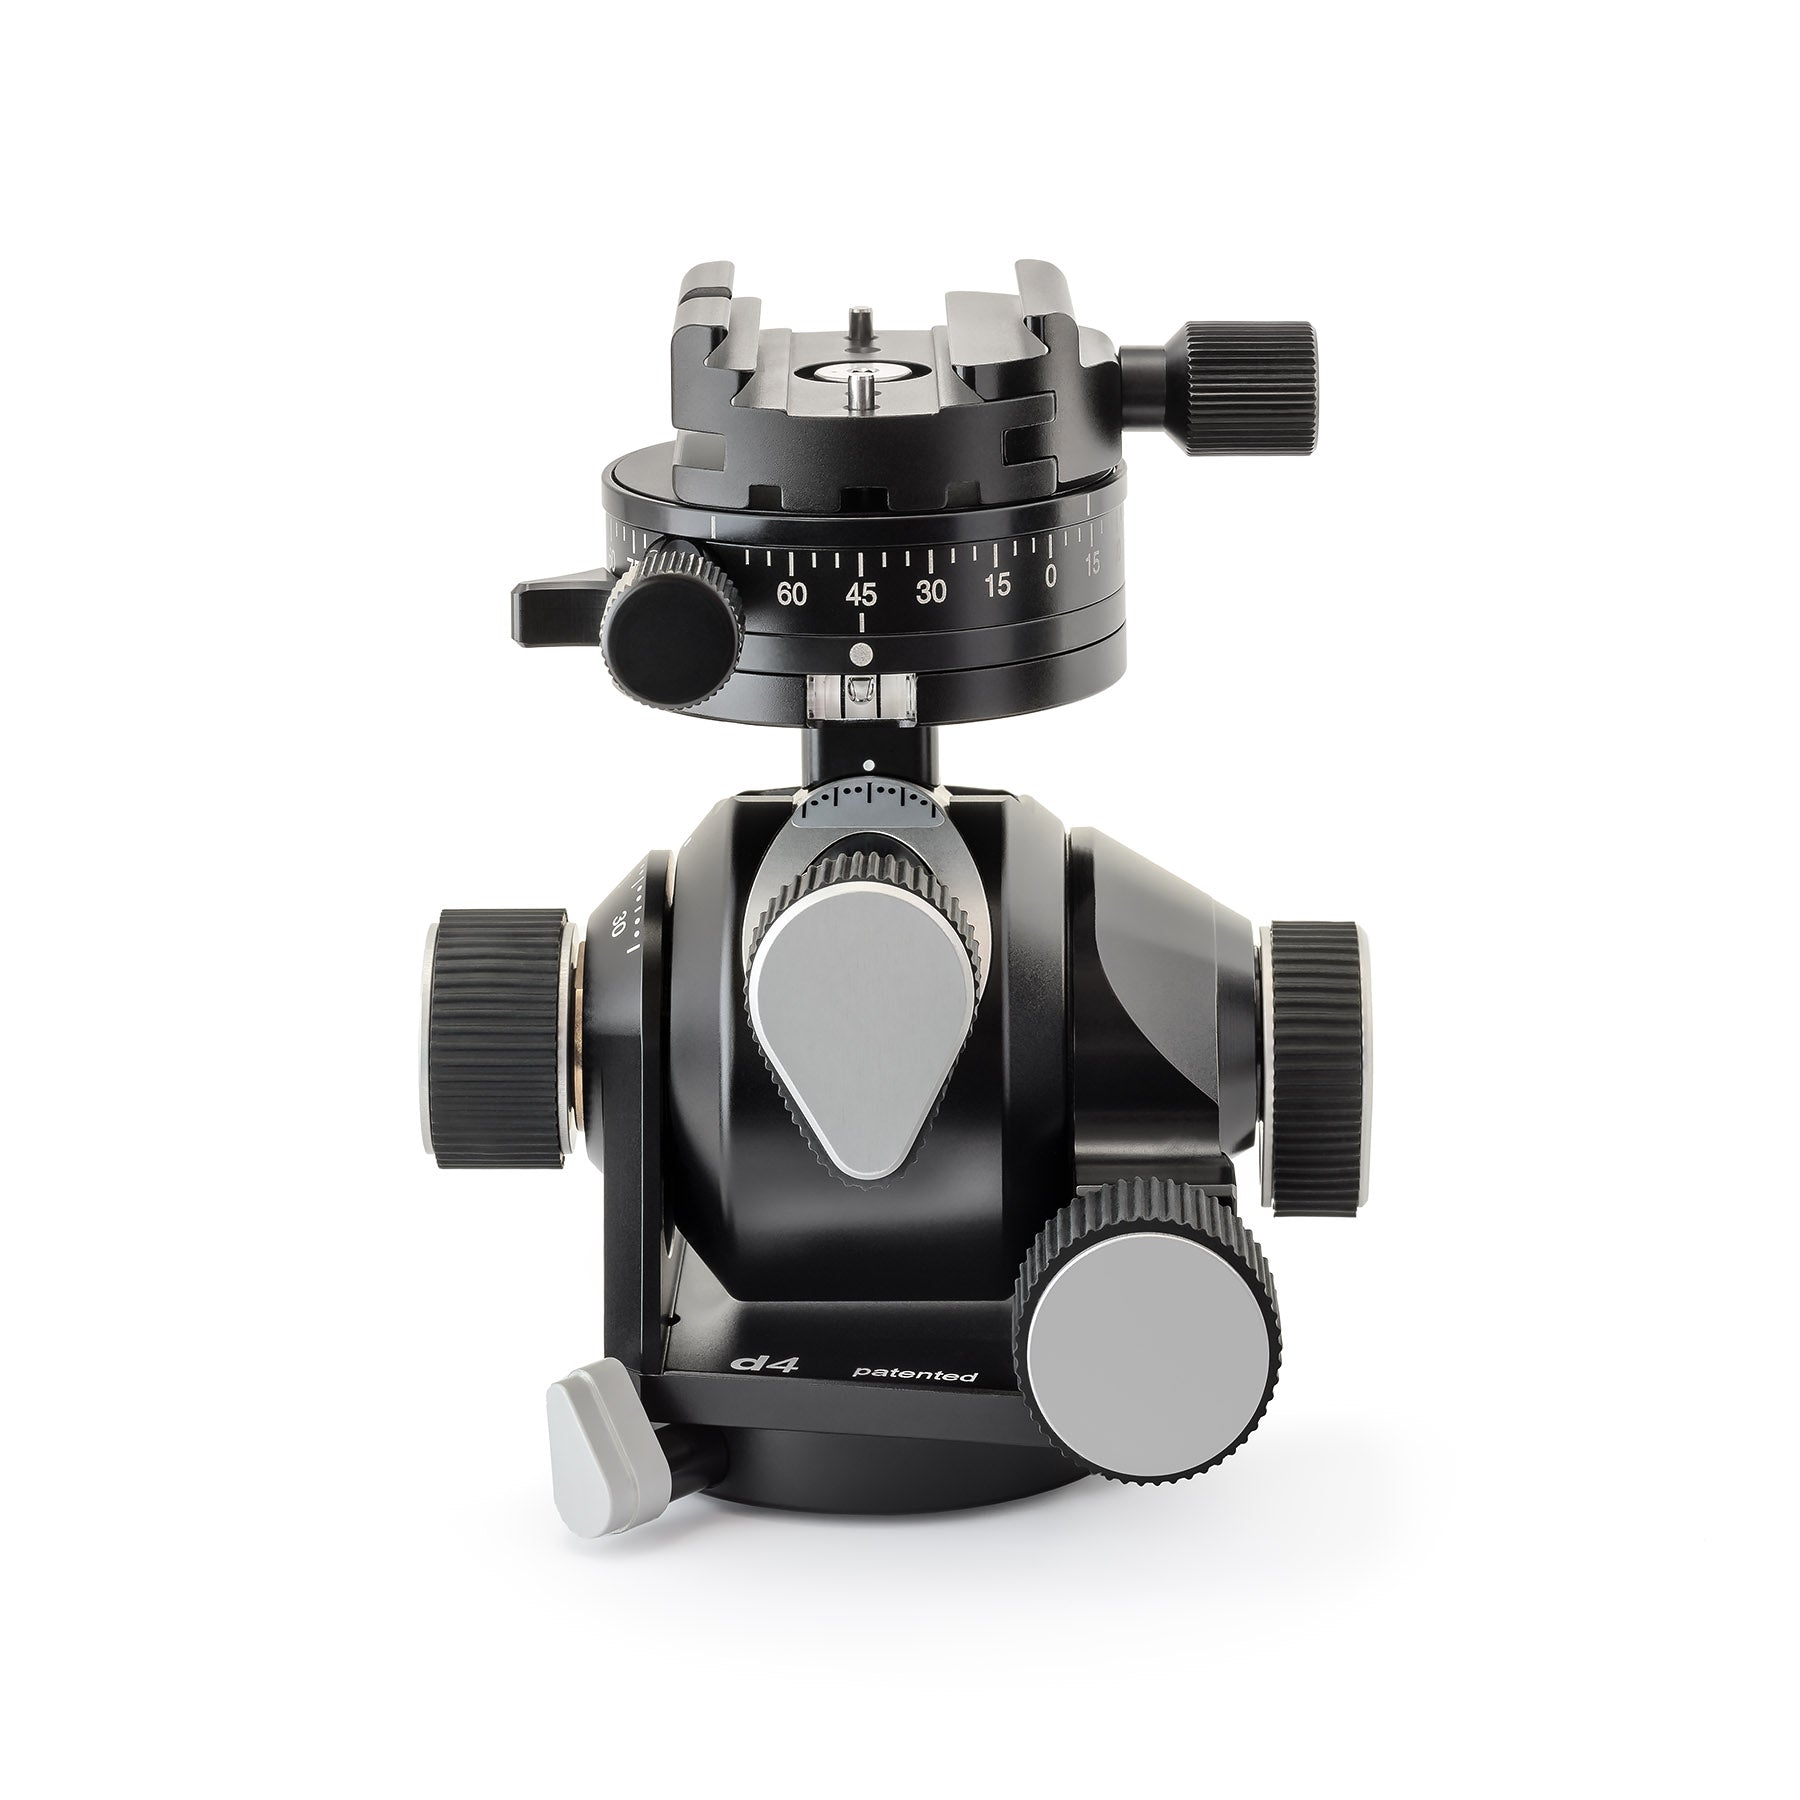 Arca-Swiss D4 gp geared tripod head with Classic quick release, front view photograph, geared panning model 870113